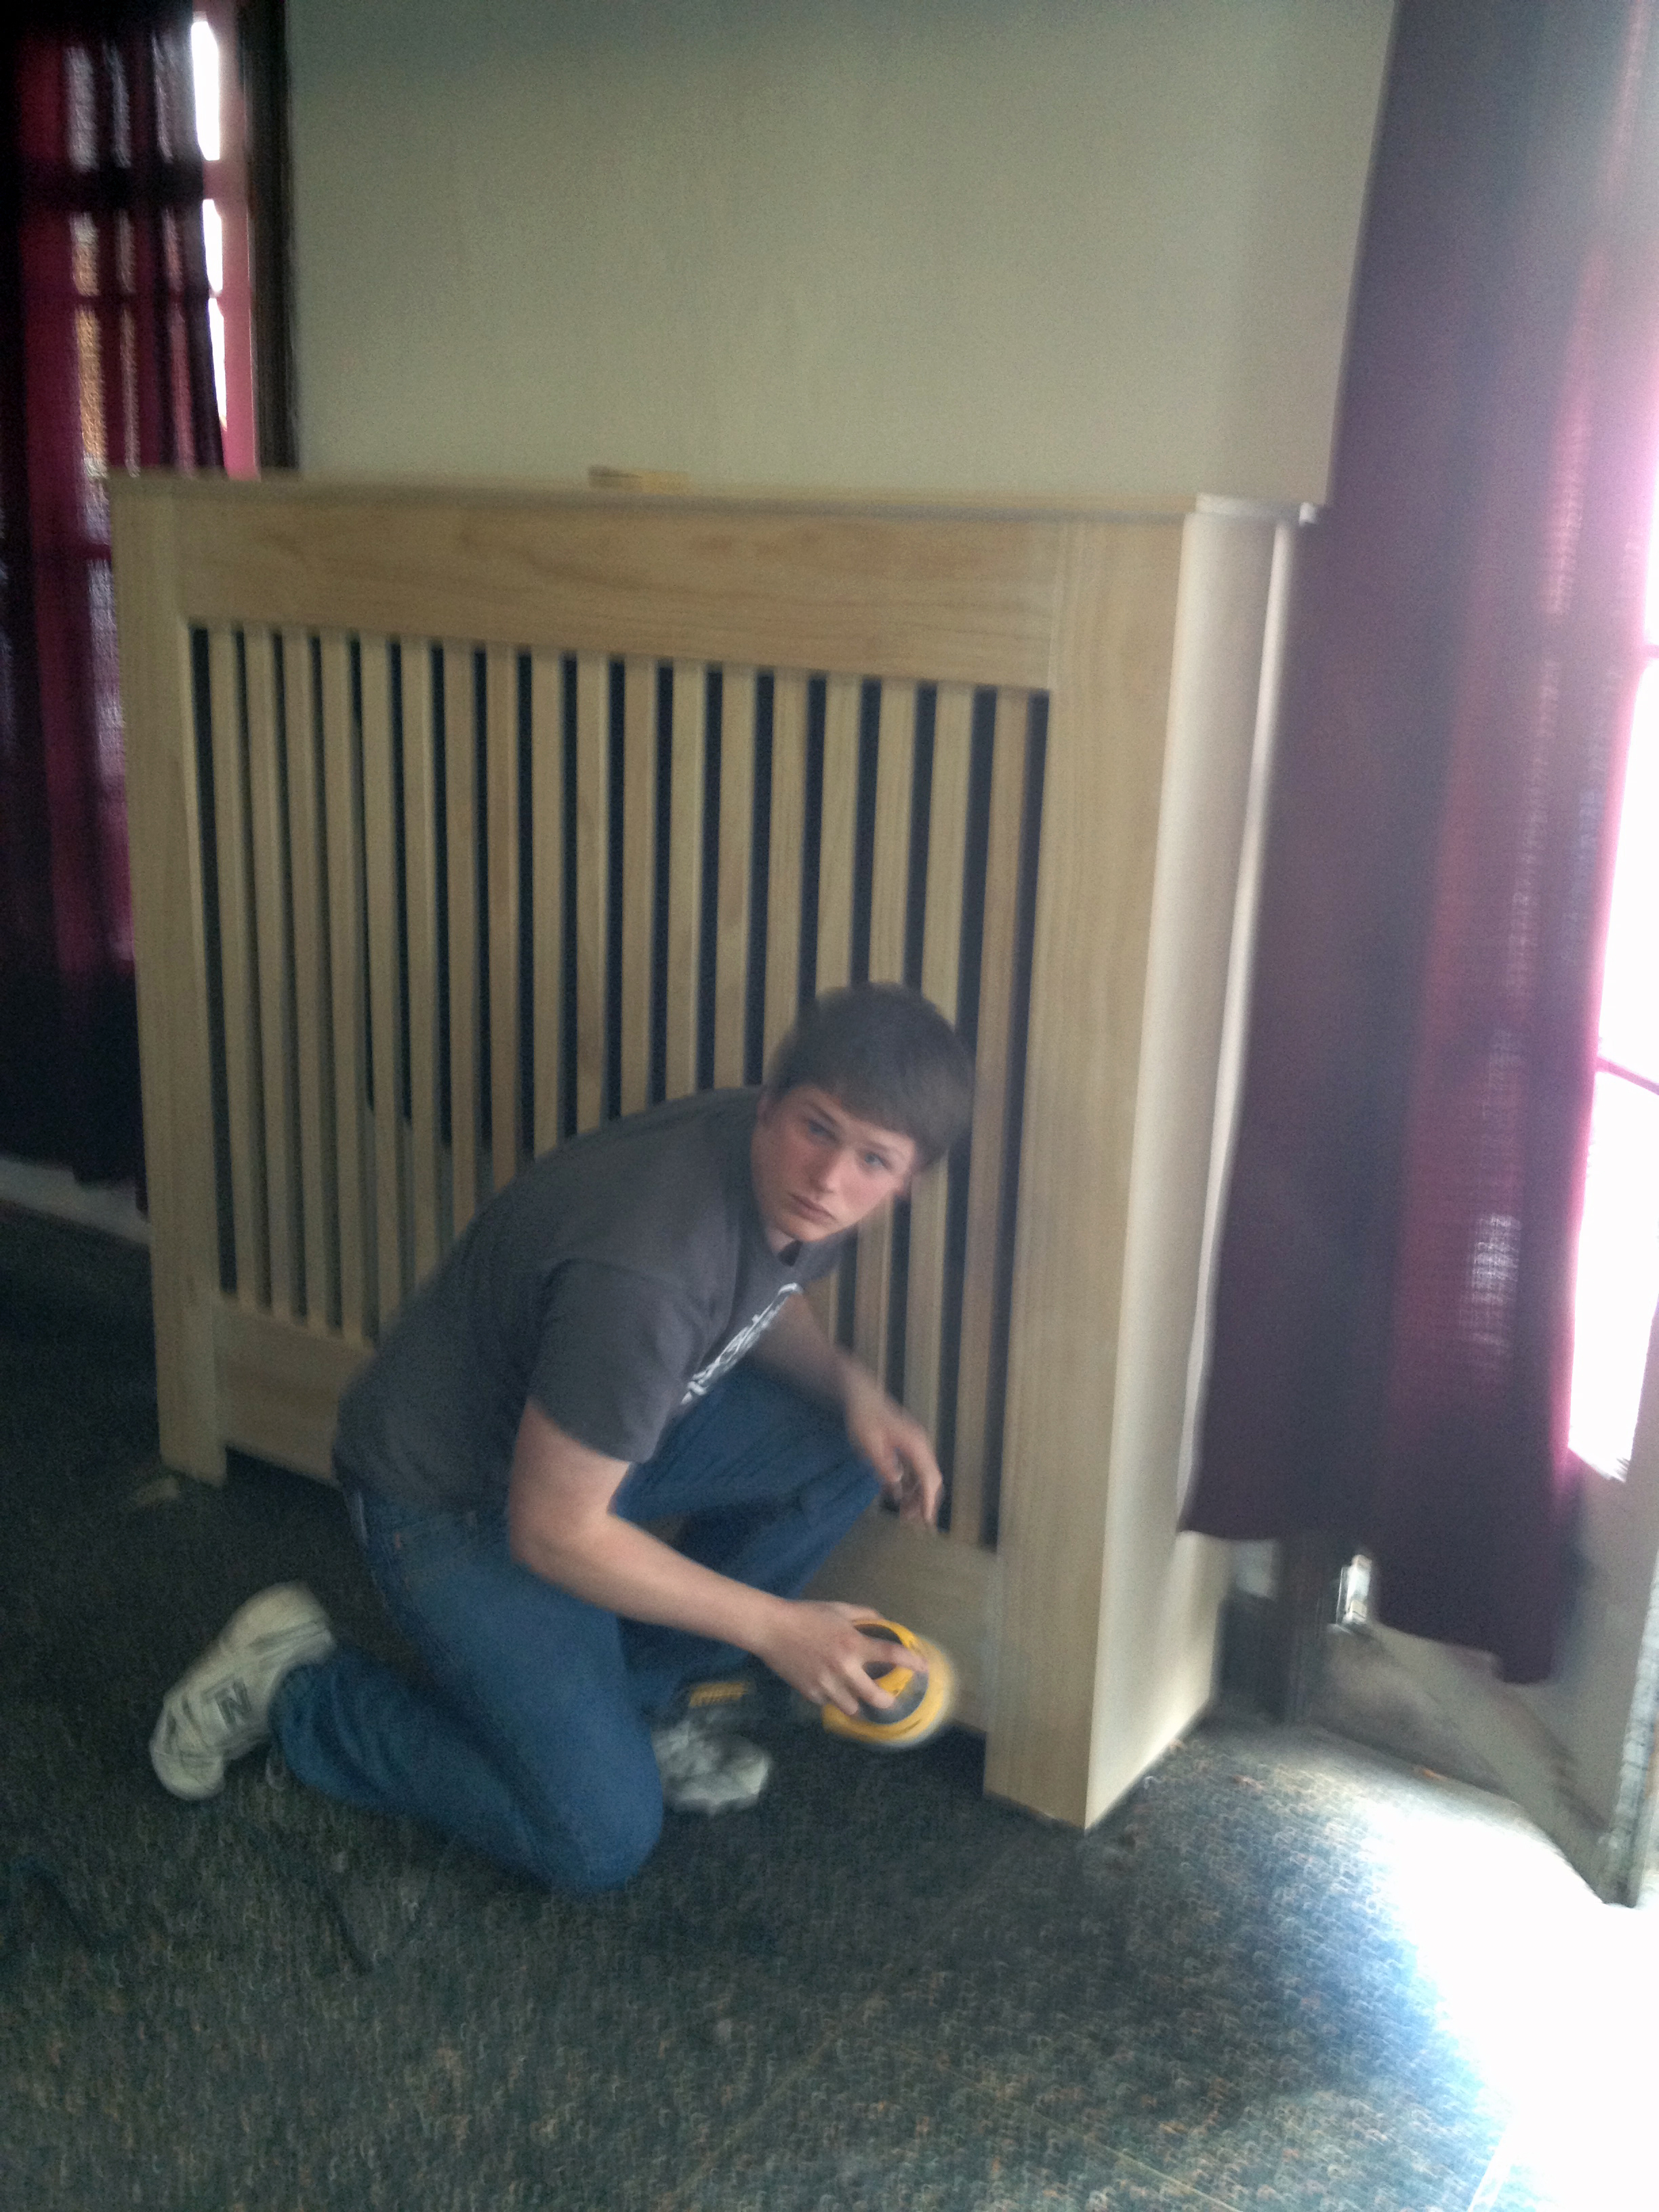  2013 Alumni Work Weekend - Pool Room Project Ian Maxwell puts the final touches on the new radiator covers 